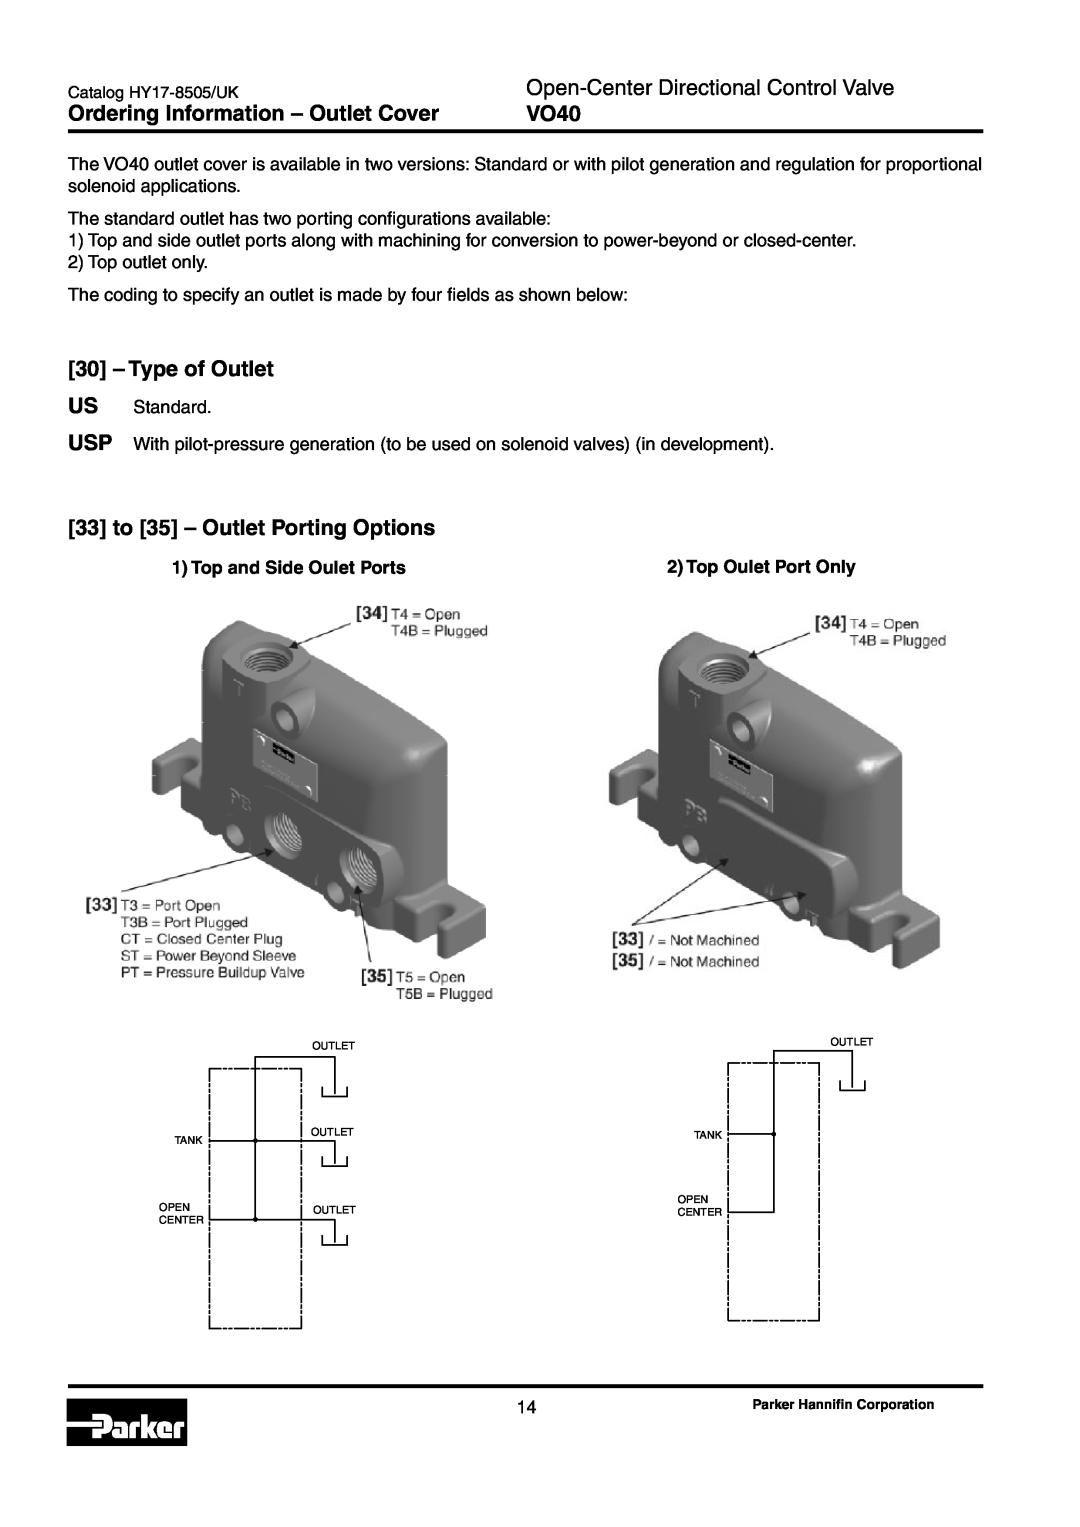 Parker Hannifin VO40 Ordering Information - Outlet Cover, Type of Outlet US Standard, 33 to 35 - Outlet Porting Options 